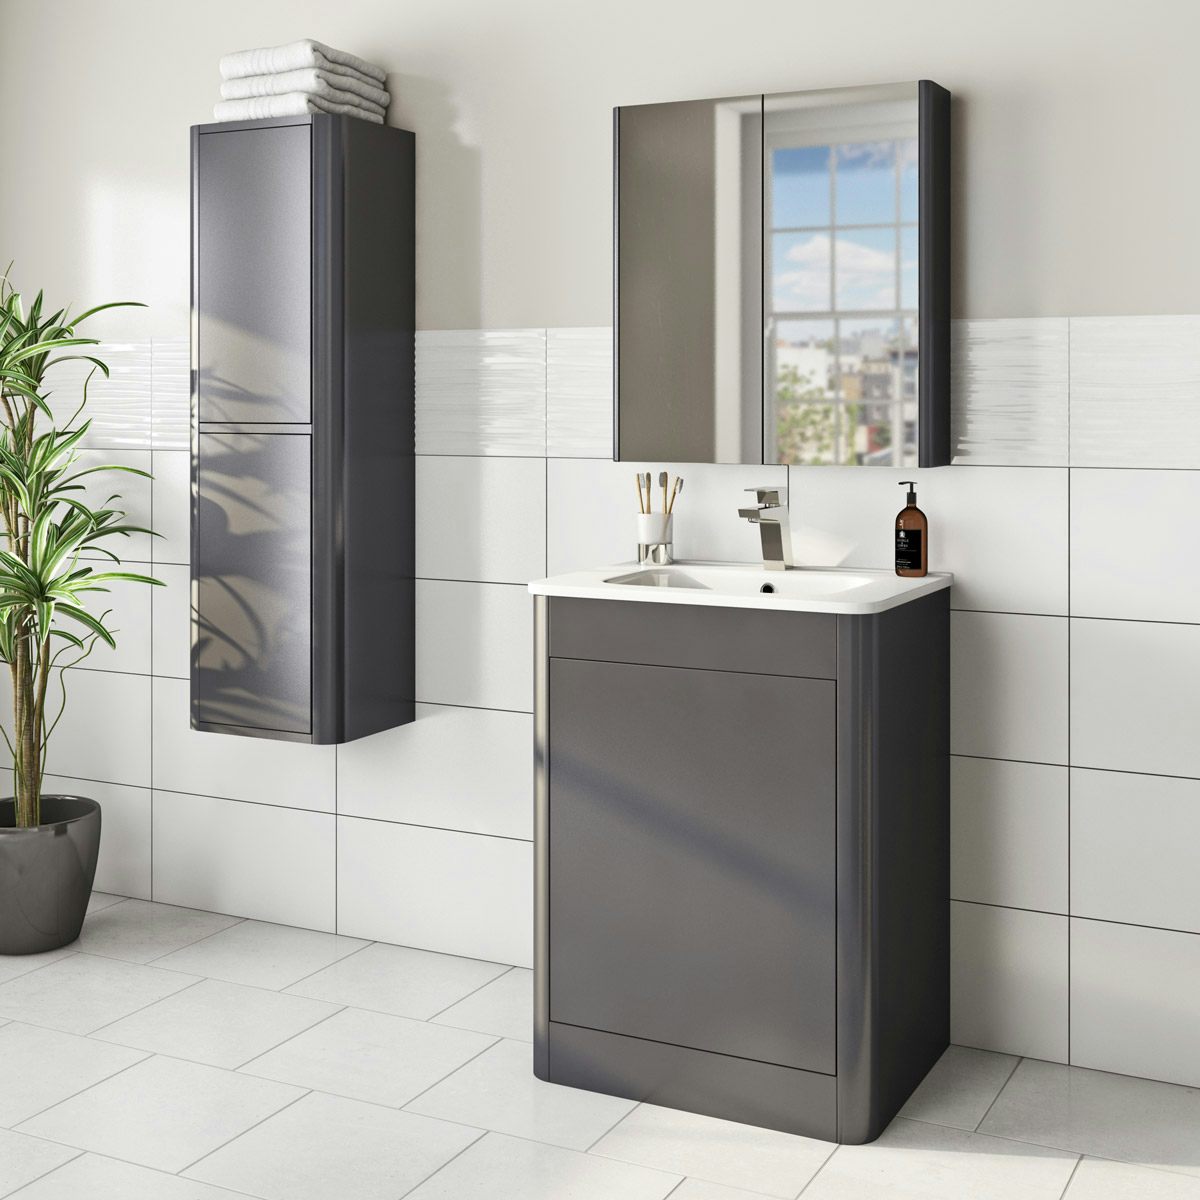 Mode Carter slate gloss grey furniture package with floorstanding vanity unit 600mm